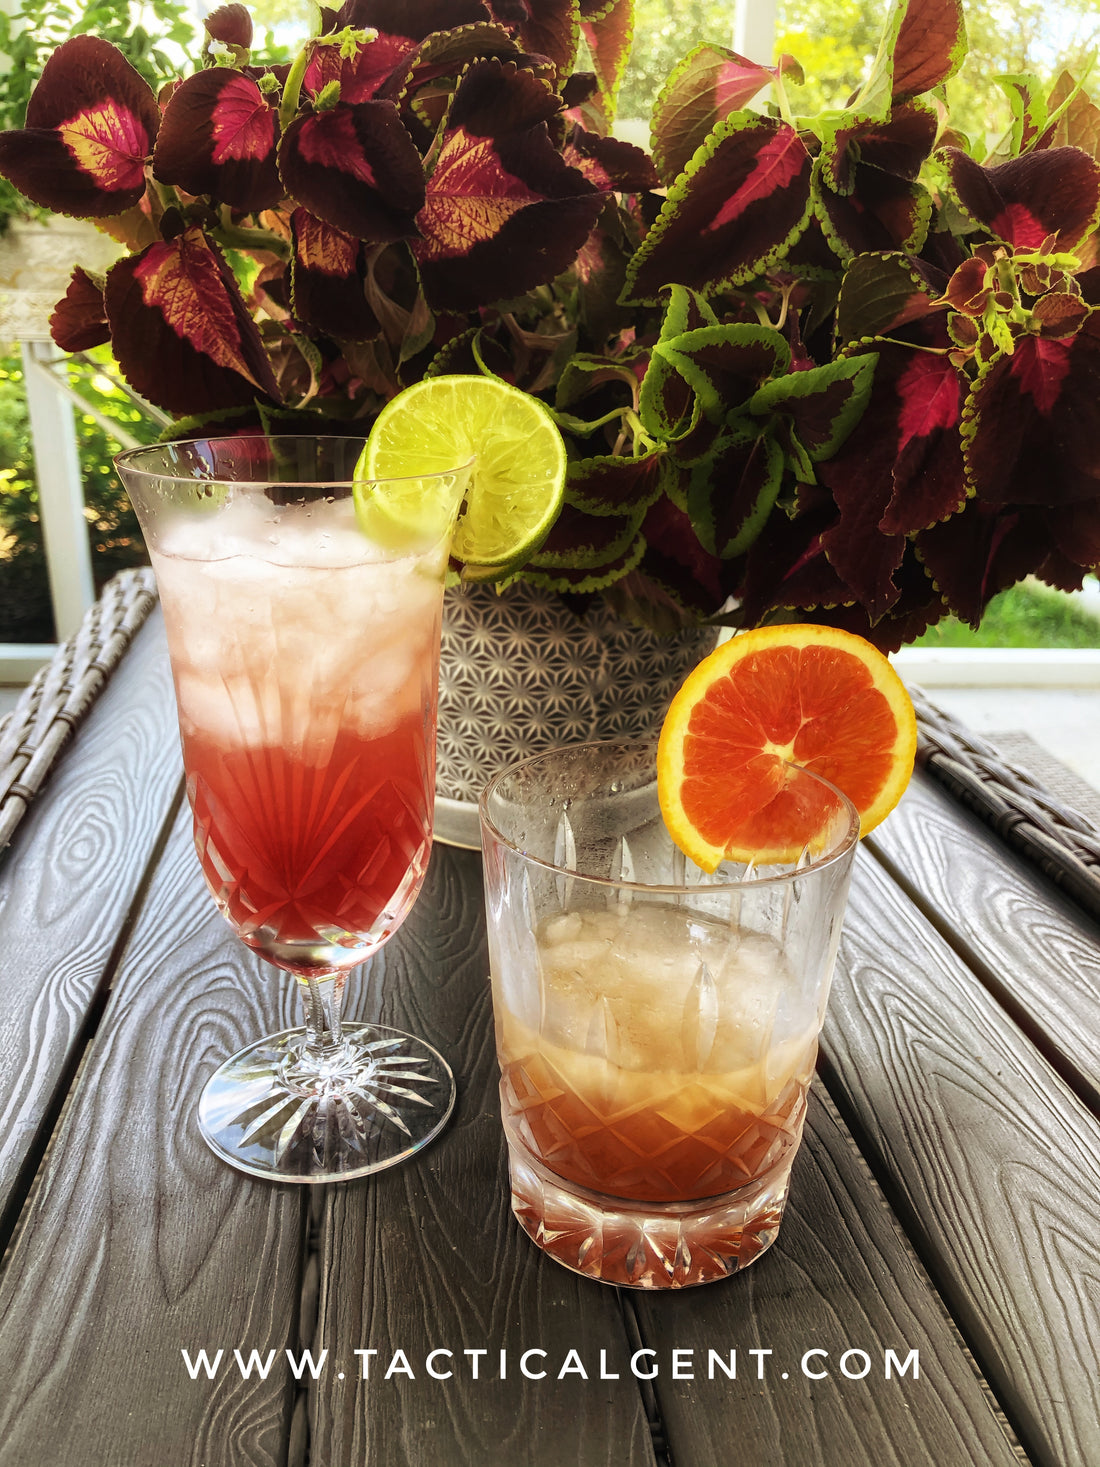 His & Hers Cocktails - Planter's Punch w/ Grenadine